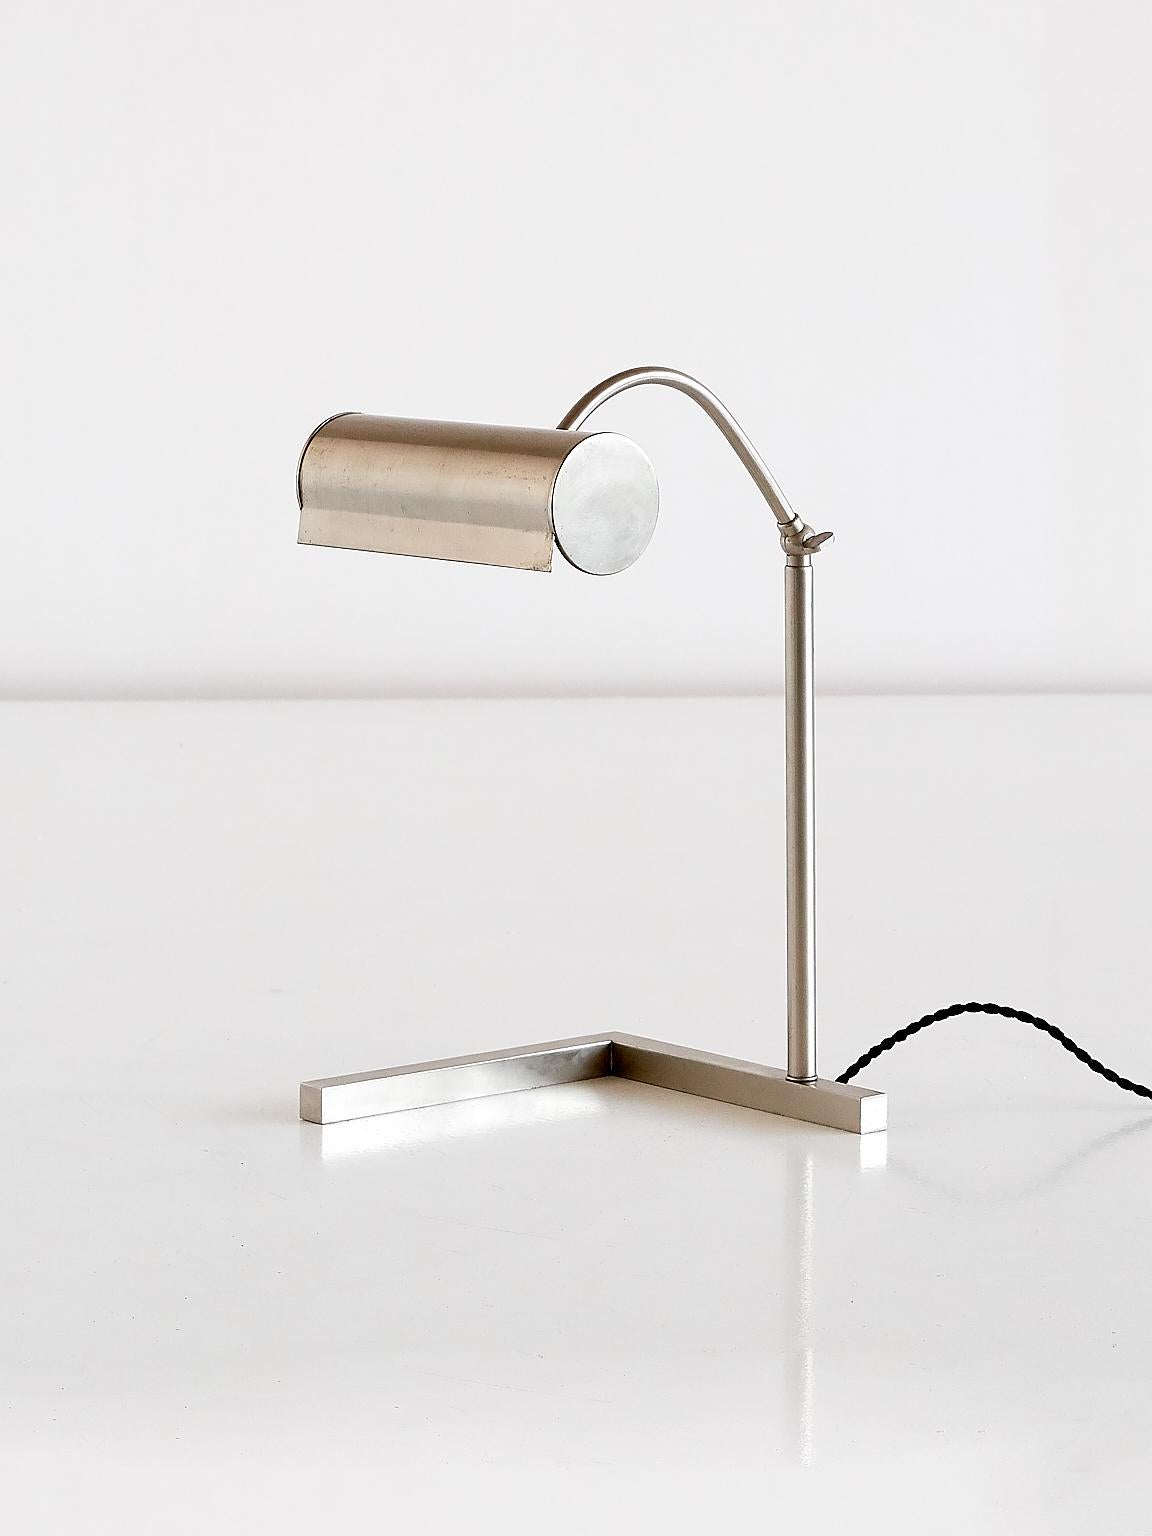 This striking desk or table lamp in brushed steel was manufactured in The Netherlands in the 1930s. The lamp consists of an L shaped base, with a cylindrical adjustable shade. Reminiscent in style and execution of the work by Dutch contemporaries